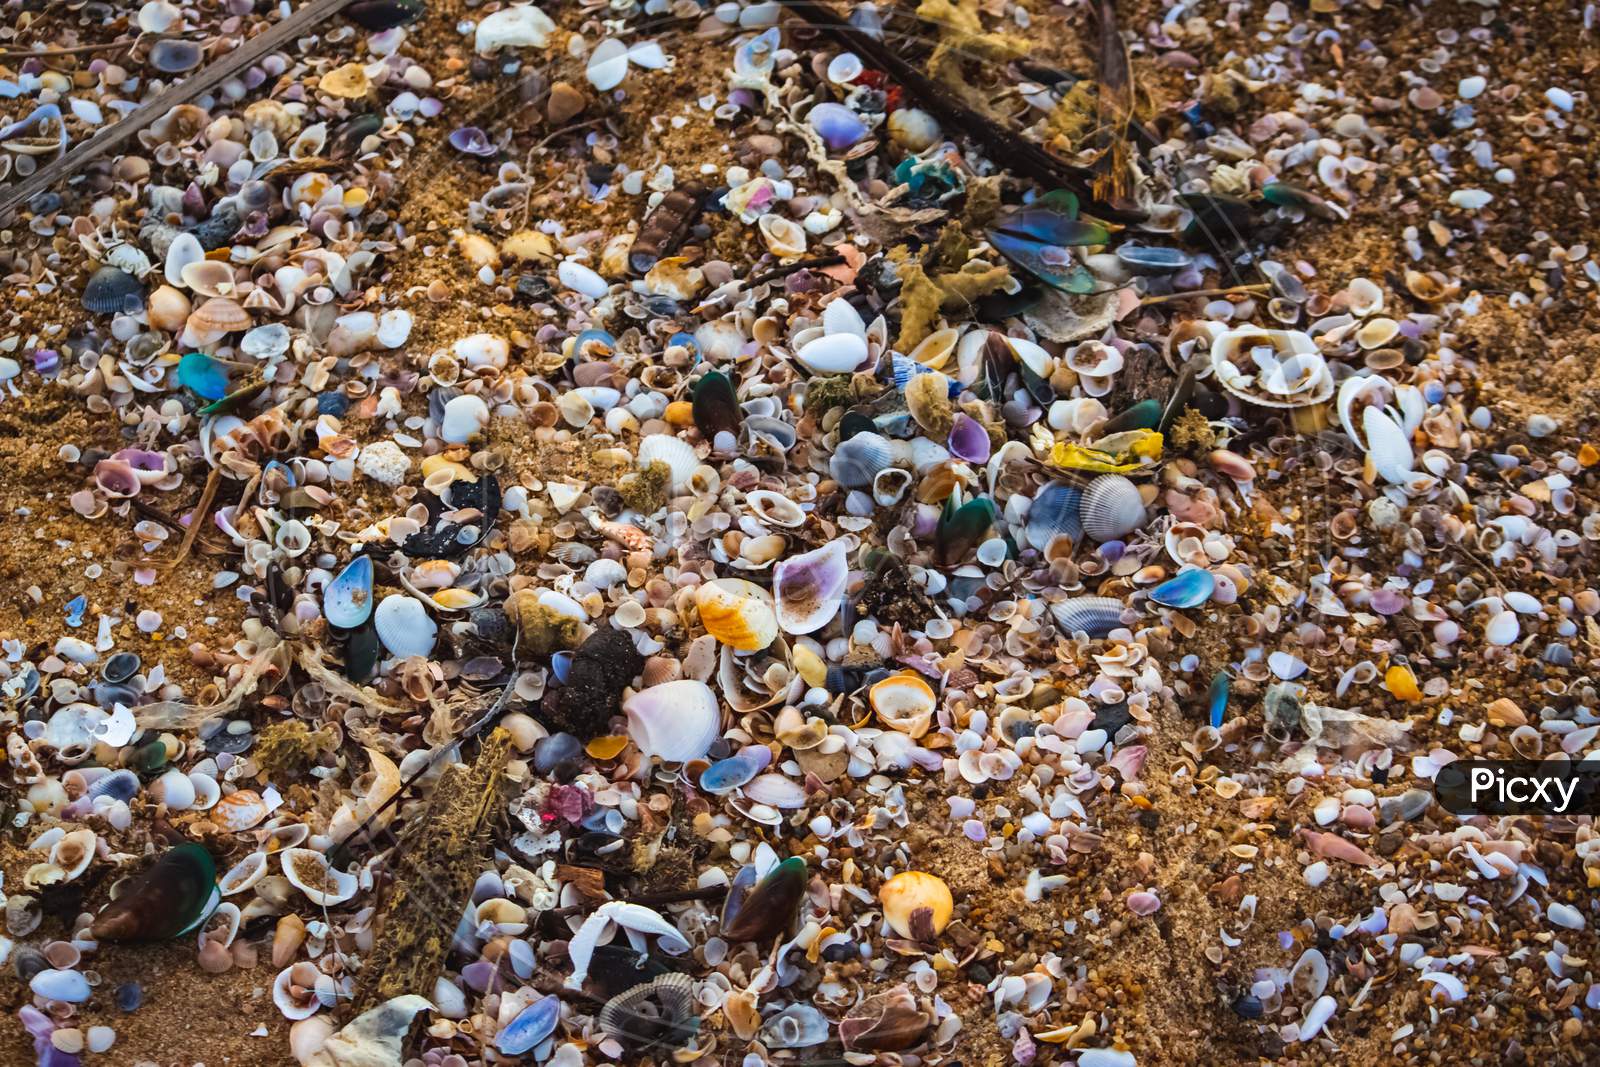 Small Shells And Garbage Pollution On The Beach Near Chennai. View Of Beach Covered With Different Sea Shells. Selective Focus. Many Small Shells Close-Up Lying On The Beach On A Summer Day